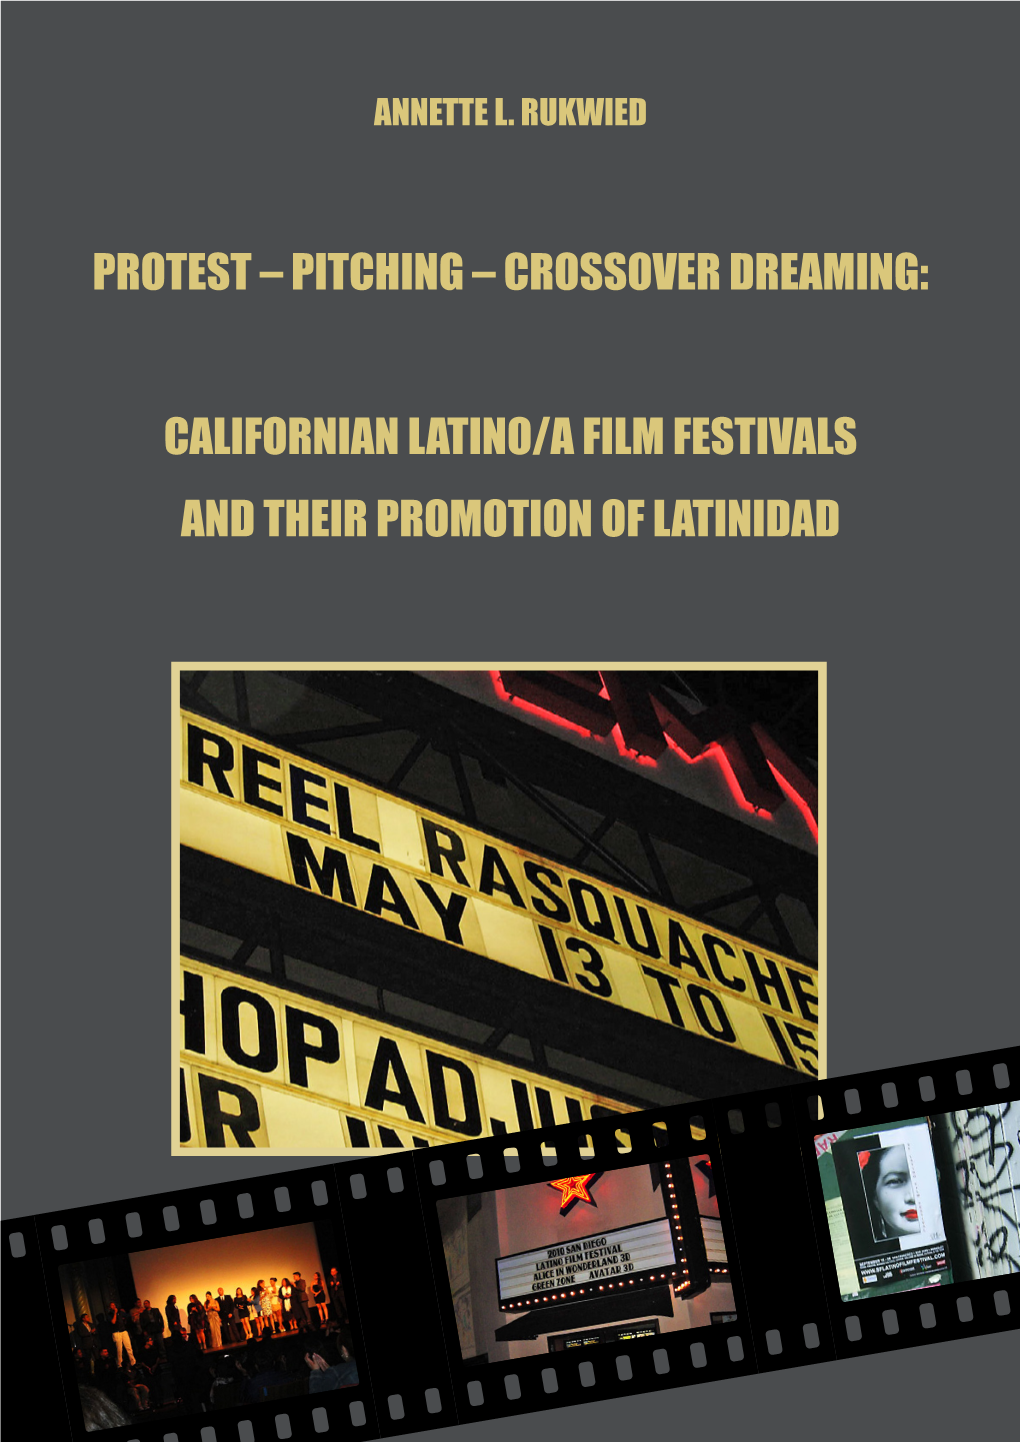 Californian Latino/A Film Festivas and Their Promotion of Latinidad